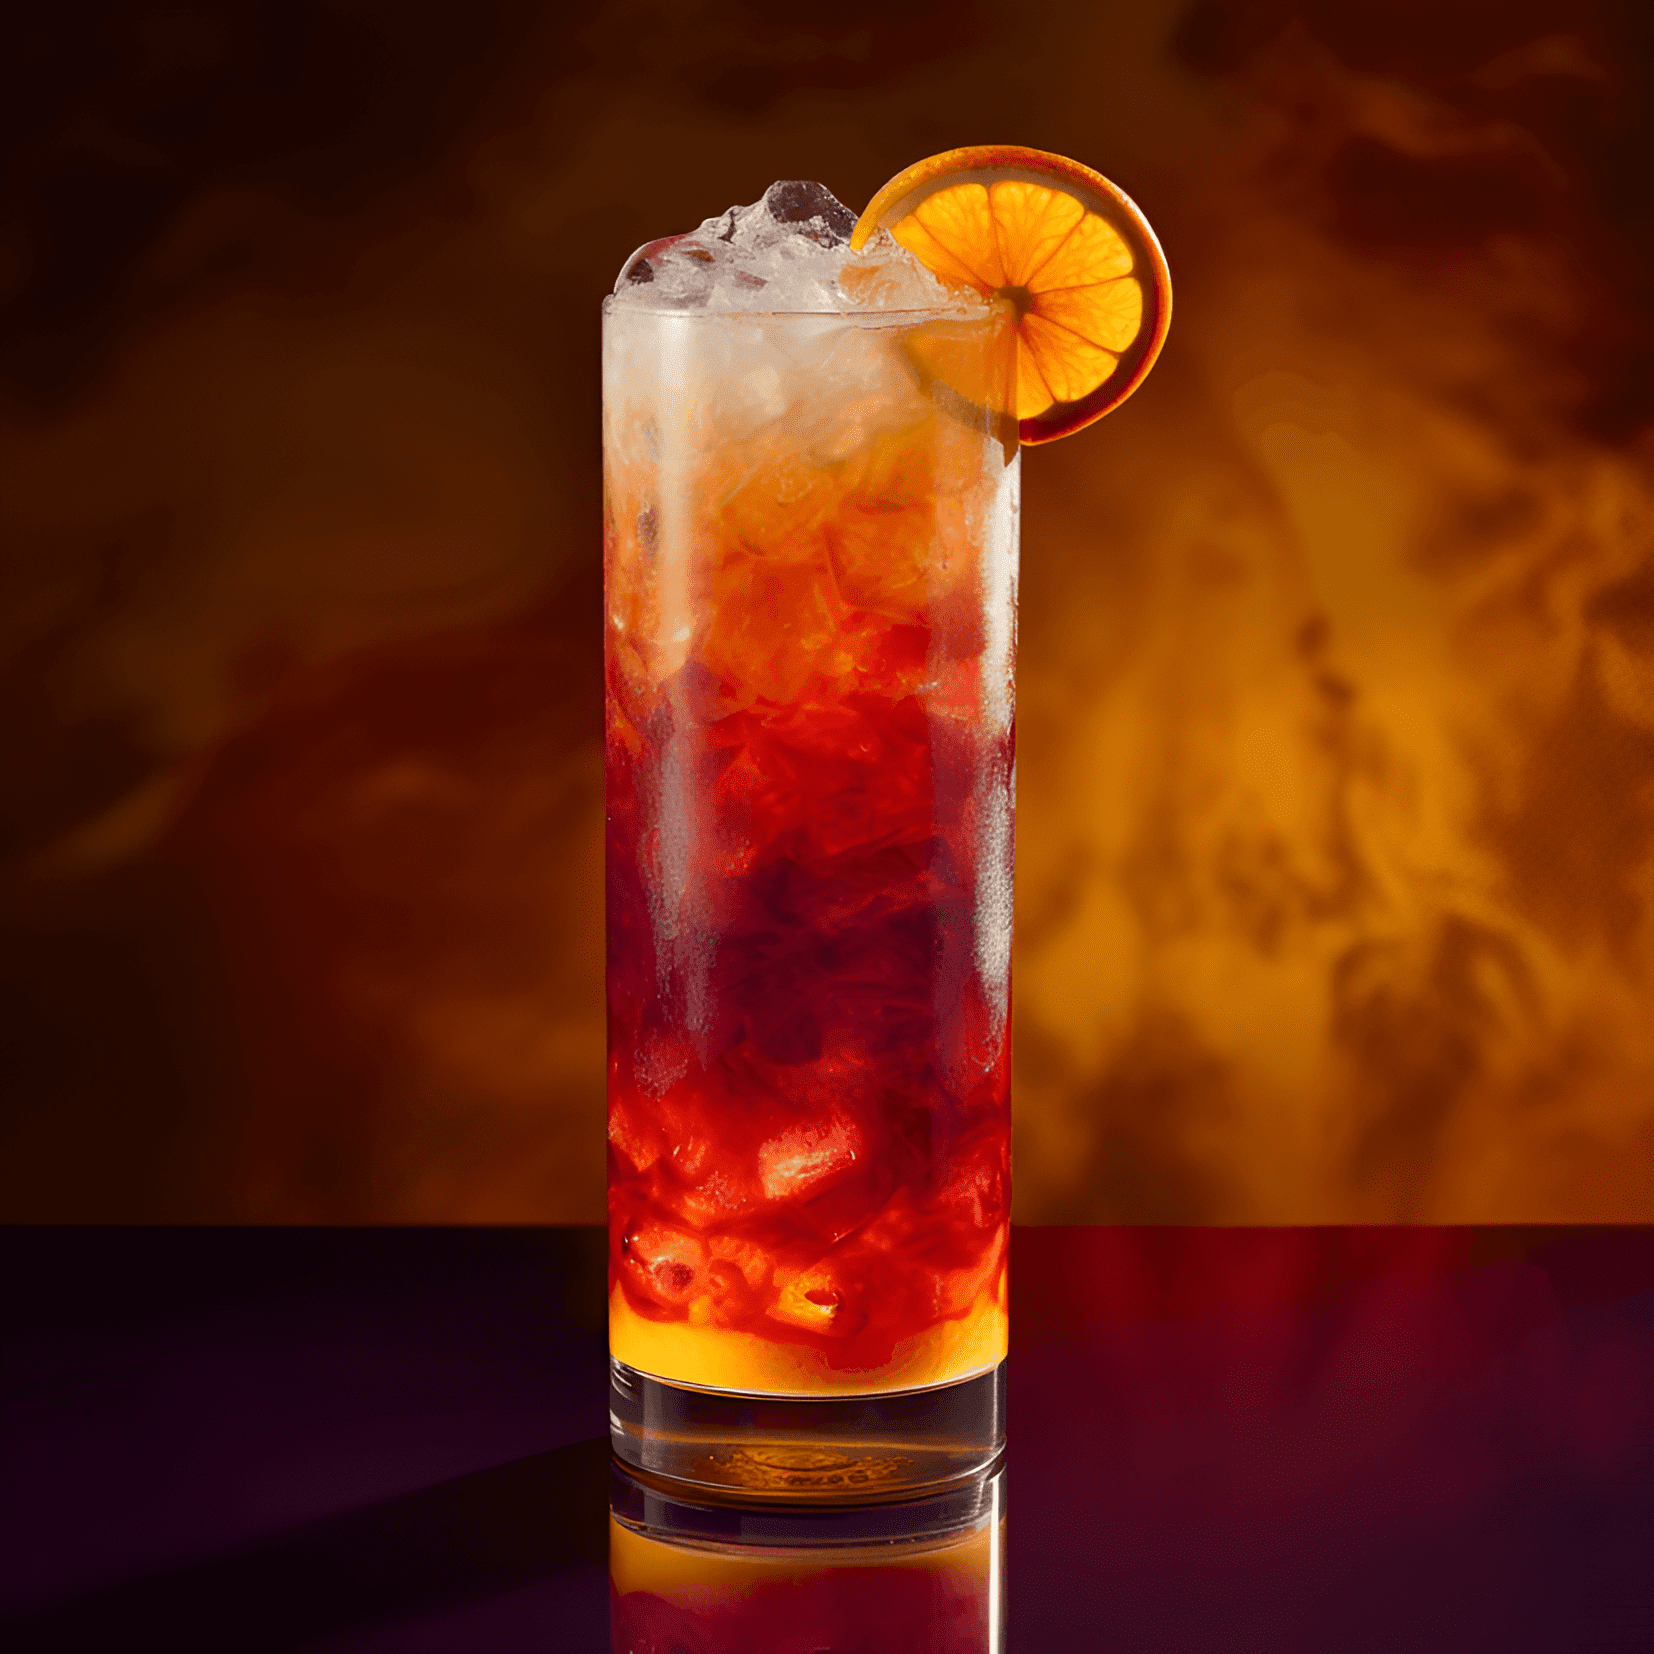 Don's Delight Cocktail Recipe - Don's Delight is a well-balanced cocktail with a complex flavor profile. It's sweet, tangy, and slightly spicy with a hint of bitterness. The combination of fruit juices, rum, and spices creates a refreshing and invigorating taste.